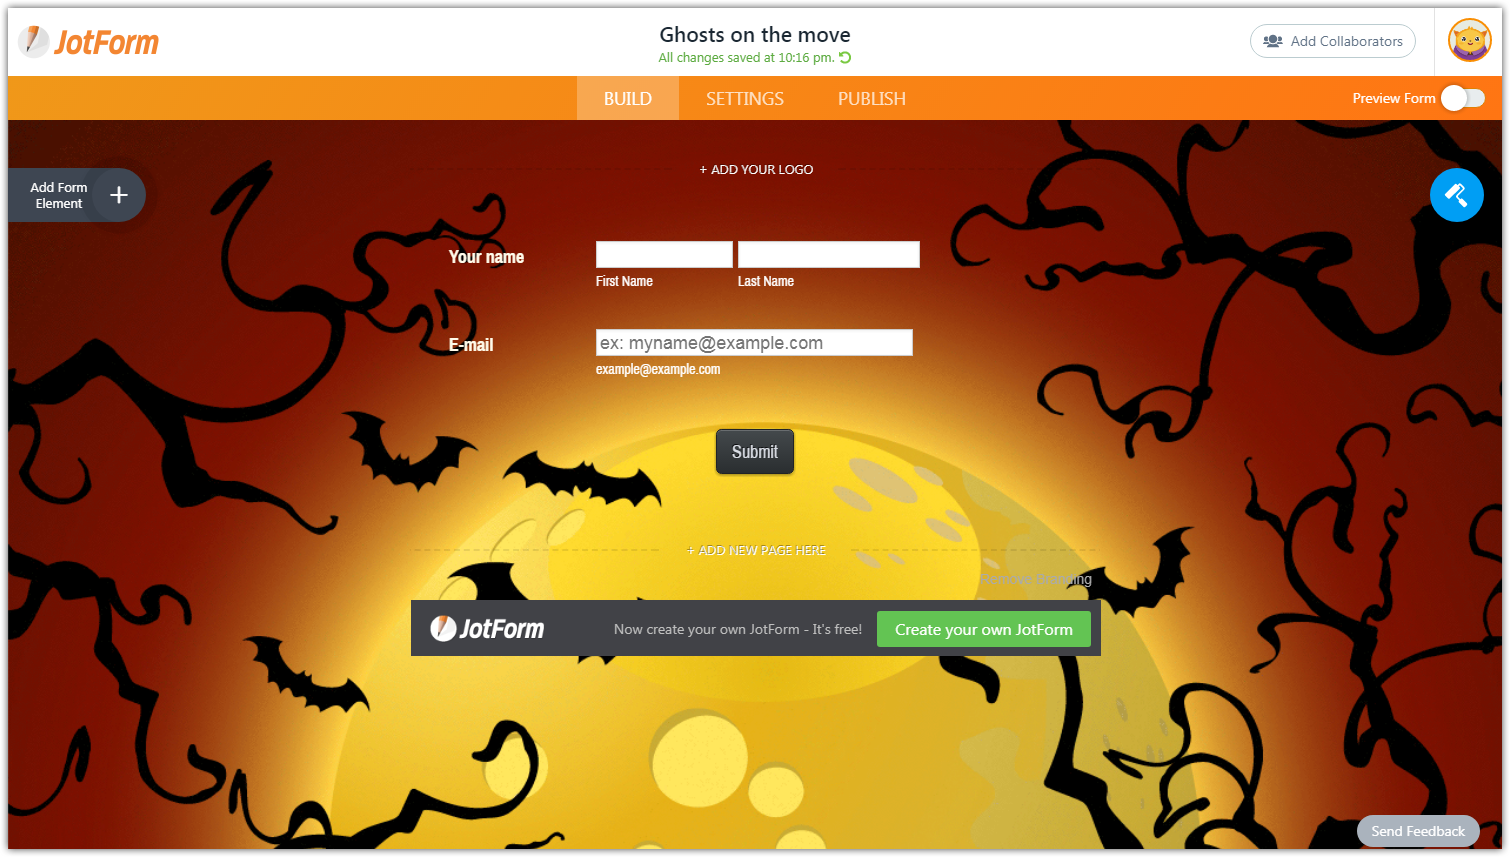 Unable to edit Halloween Theme cloned form Image 1 Screenshot 20